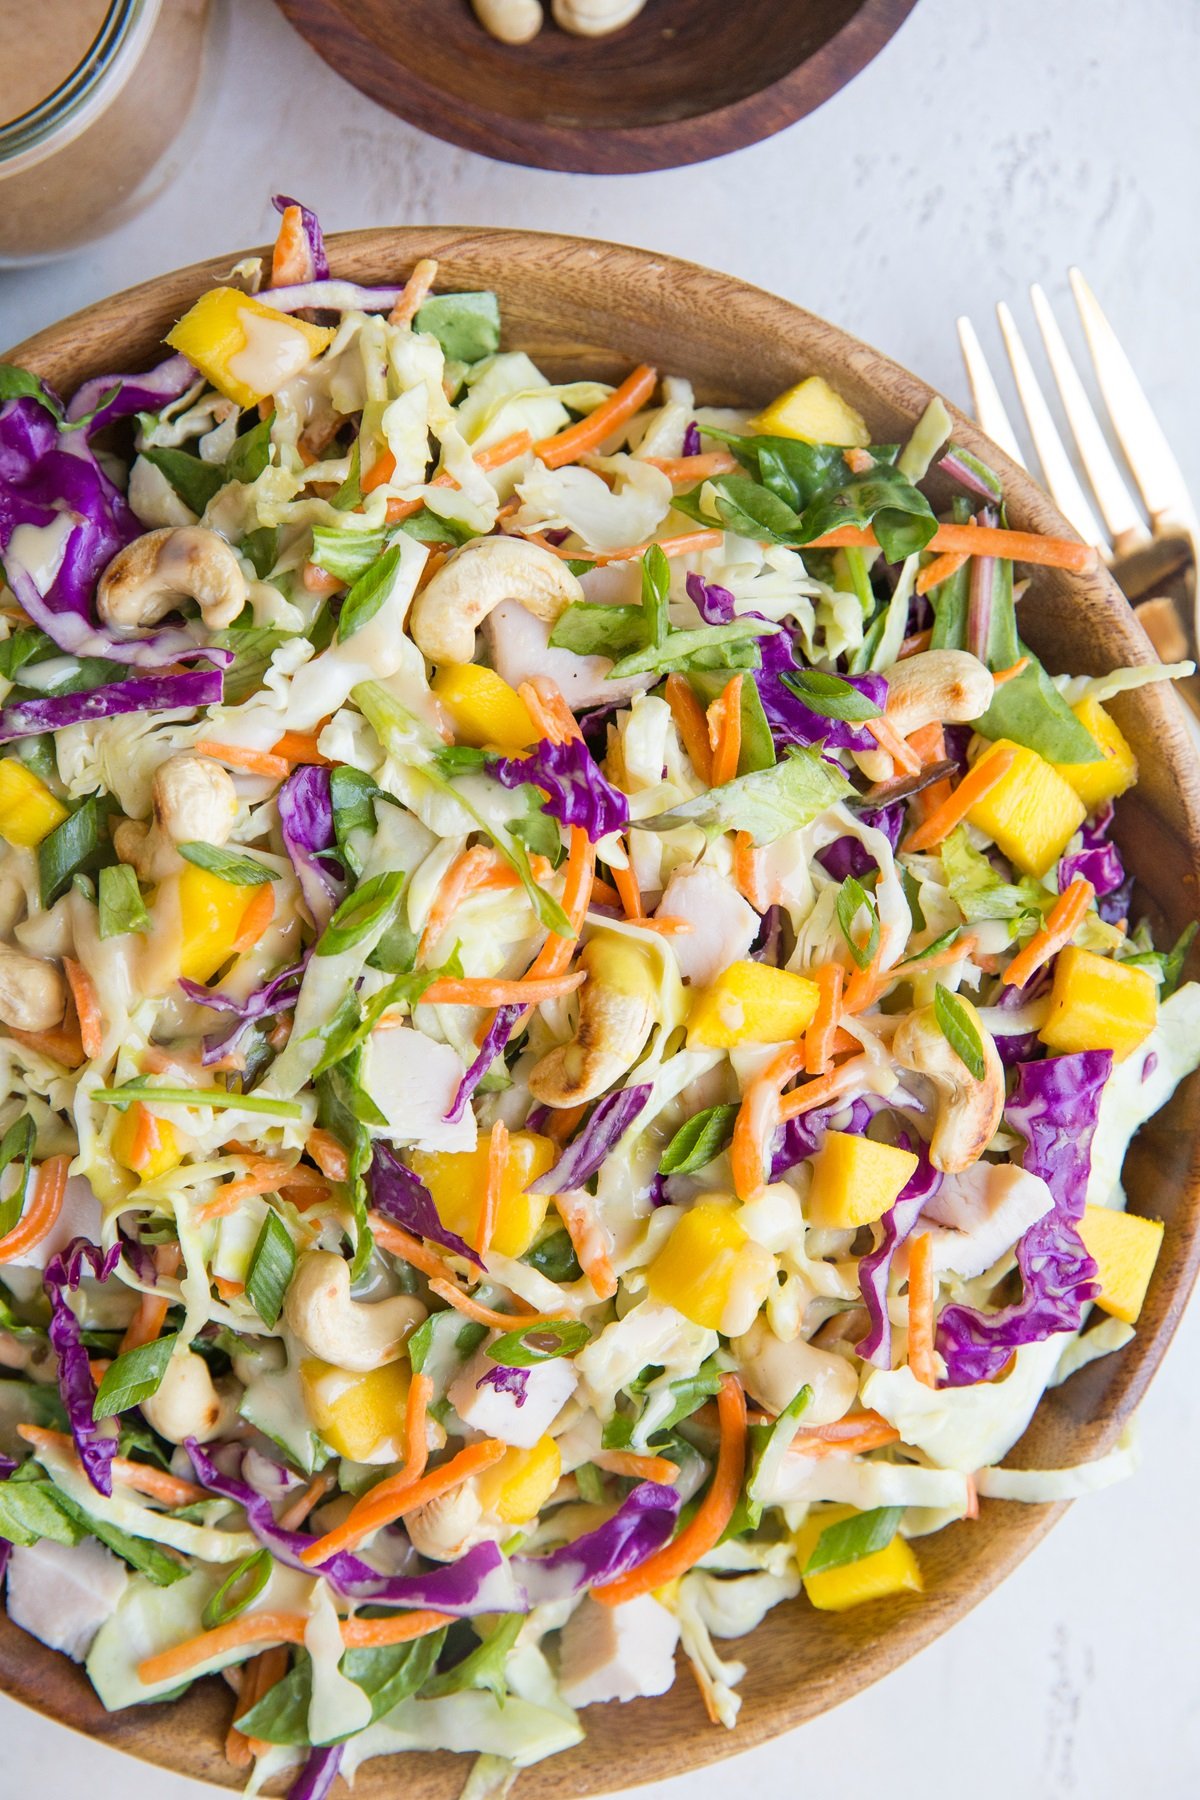 Thai Chicken Chopped Salad with cabbage, cashews, mango, and peanut dressing. A healthy, flavorful summer lunch or dinner.